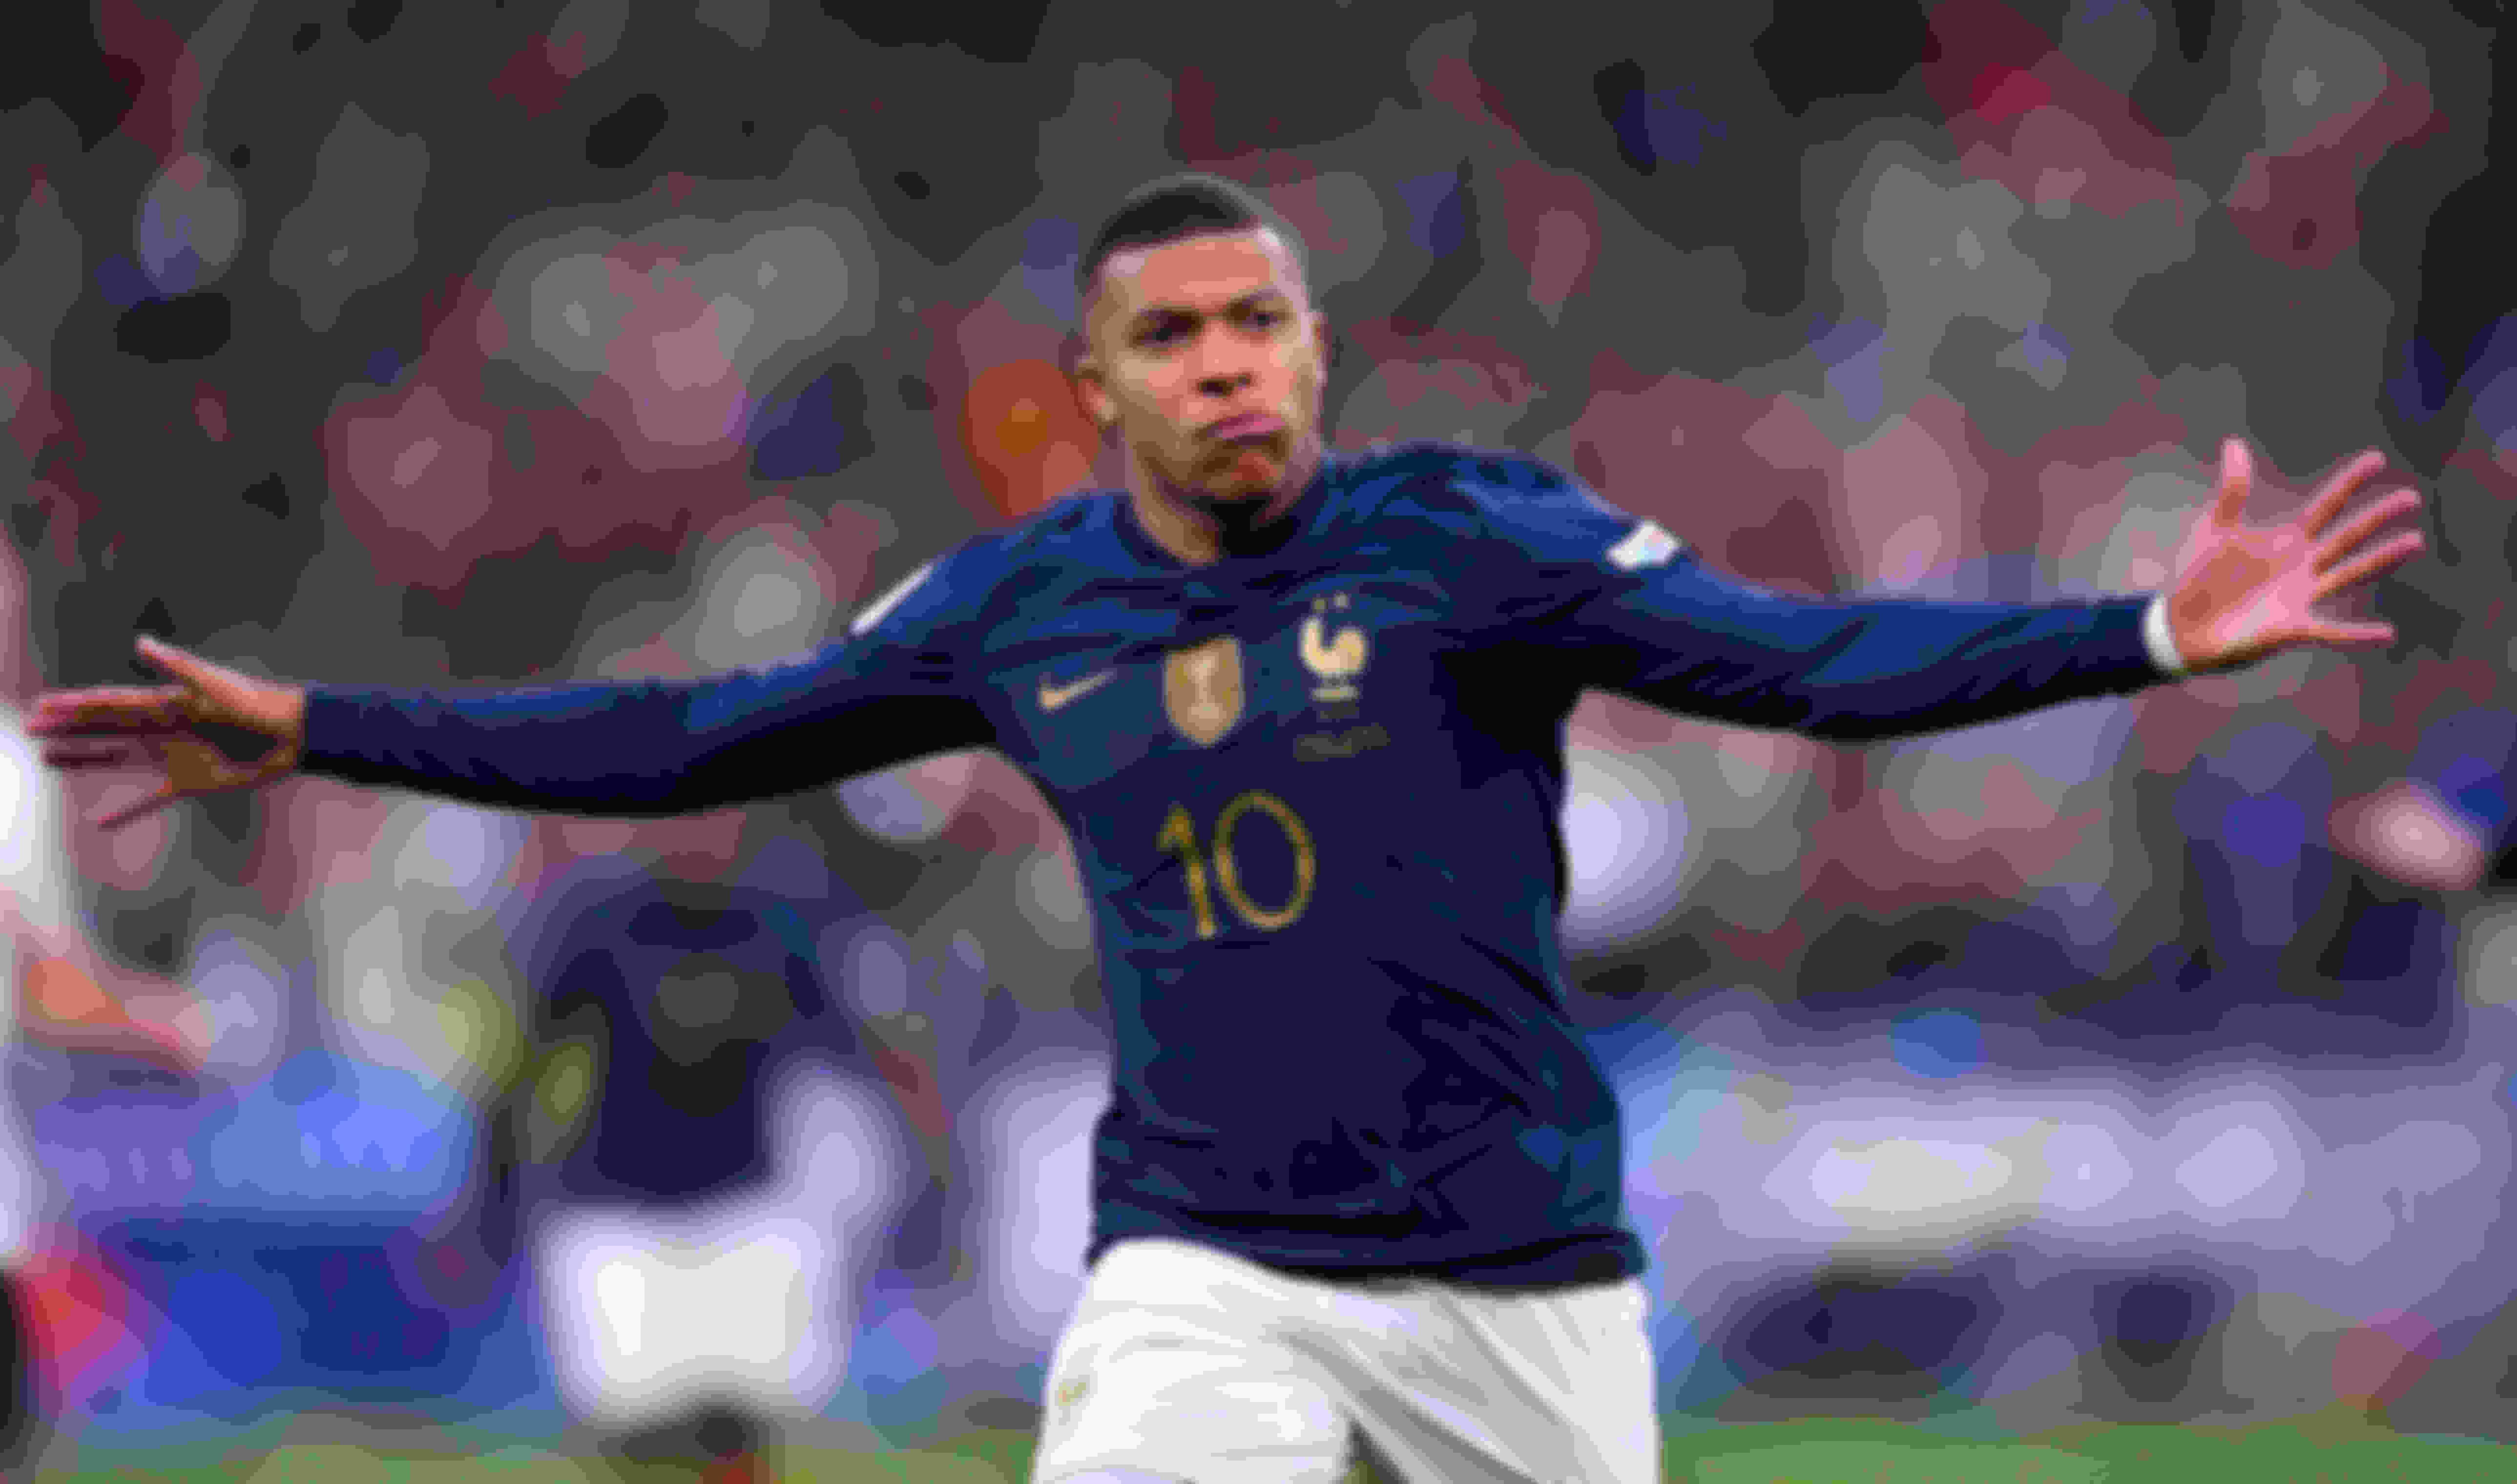 Mbappe was part of France's World Cup winning squad in 2018